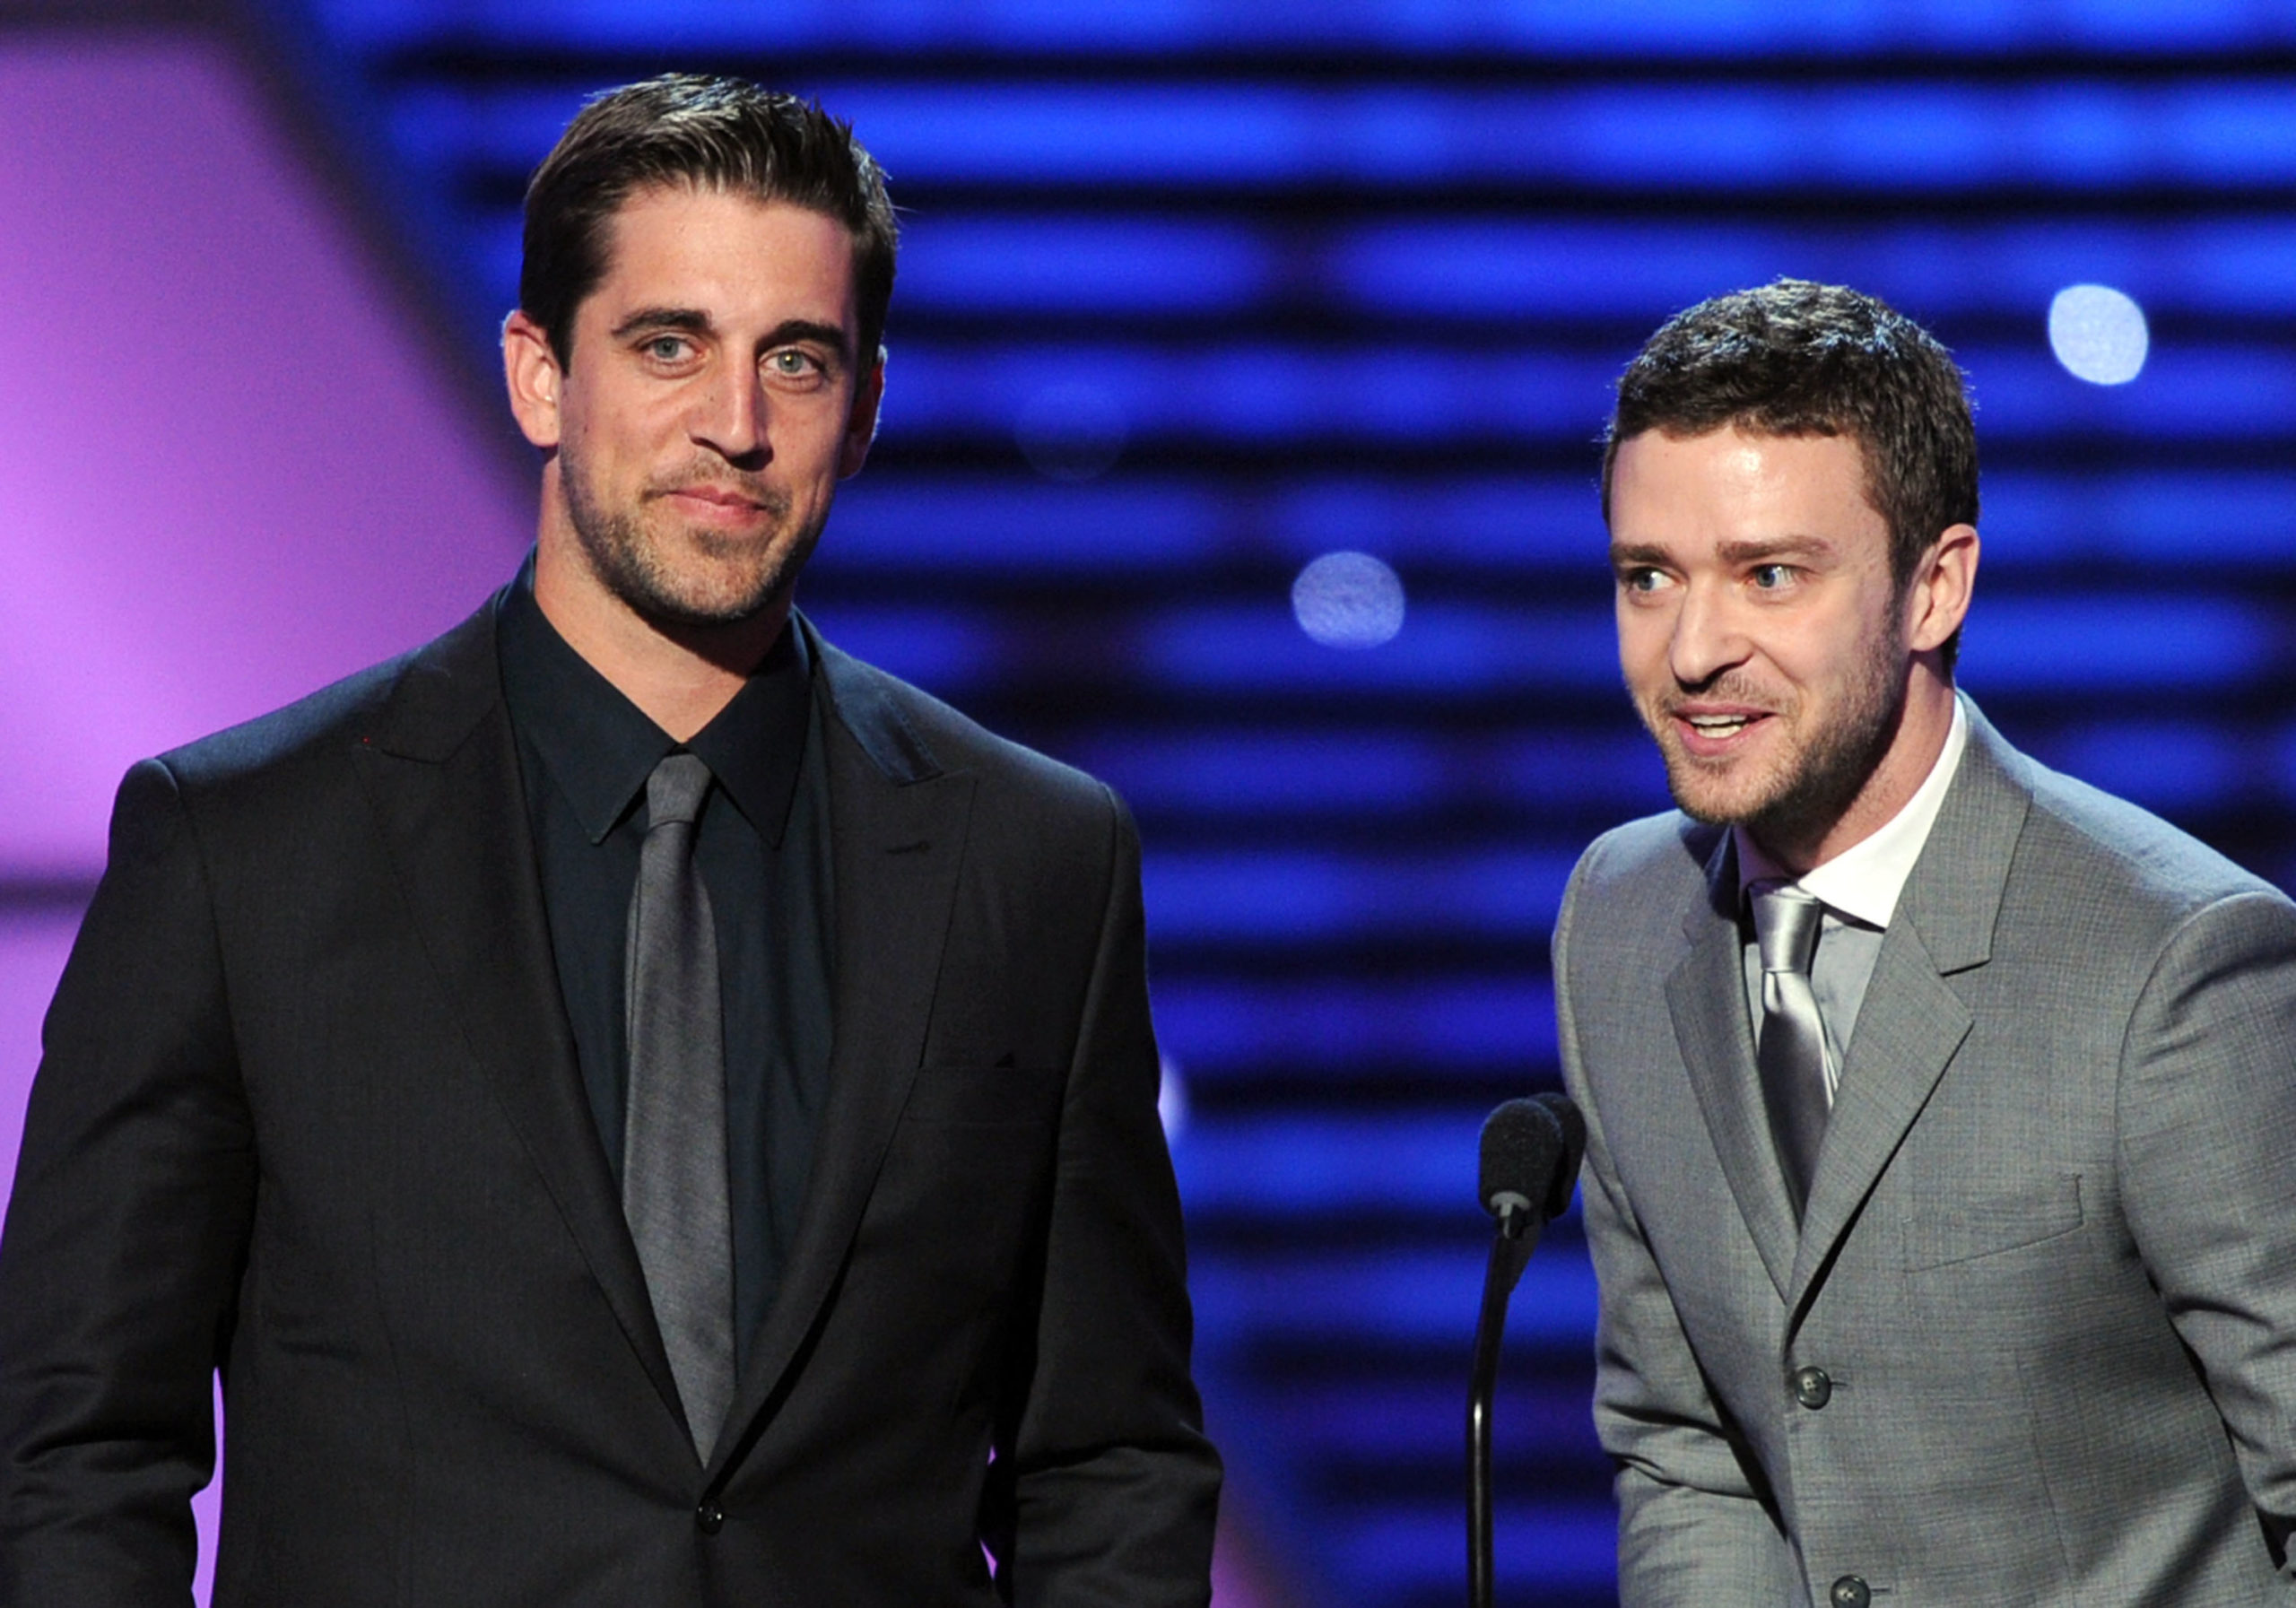 LOS ANGELES, CA - JULY 13: NFL player Aaron Rodgers and actor Justin Timberlake present the ESPY for Best Male College Athlete during The 2011 ESPY Awards at Nokia Theatre L.A. Live on July 13, 2011 in Los Angeles, California. Kevin Winter/Getty Images